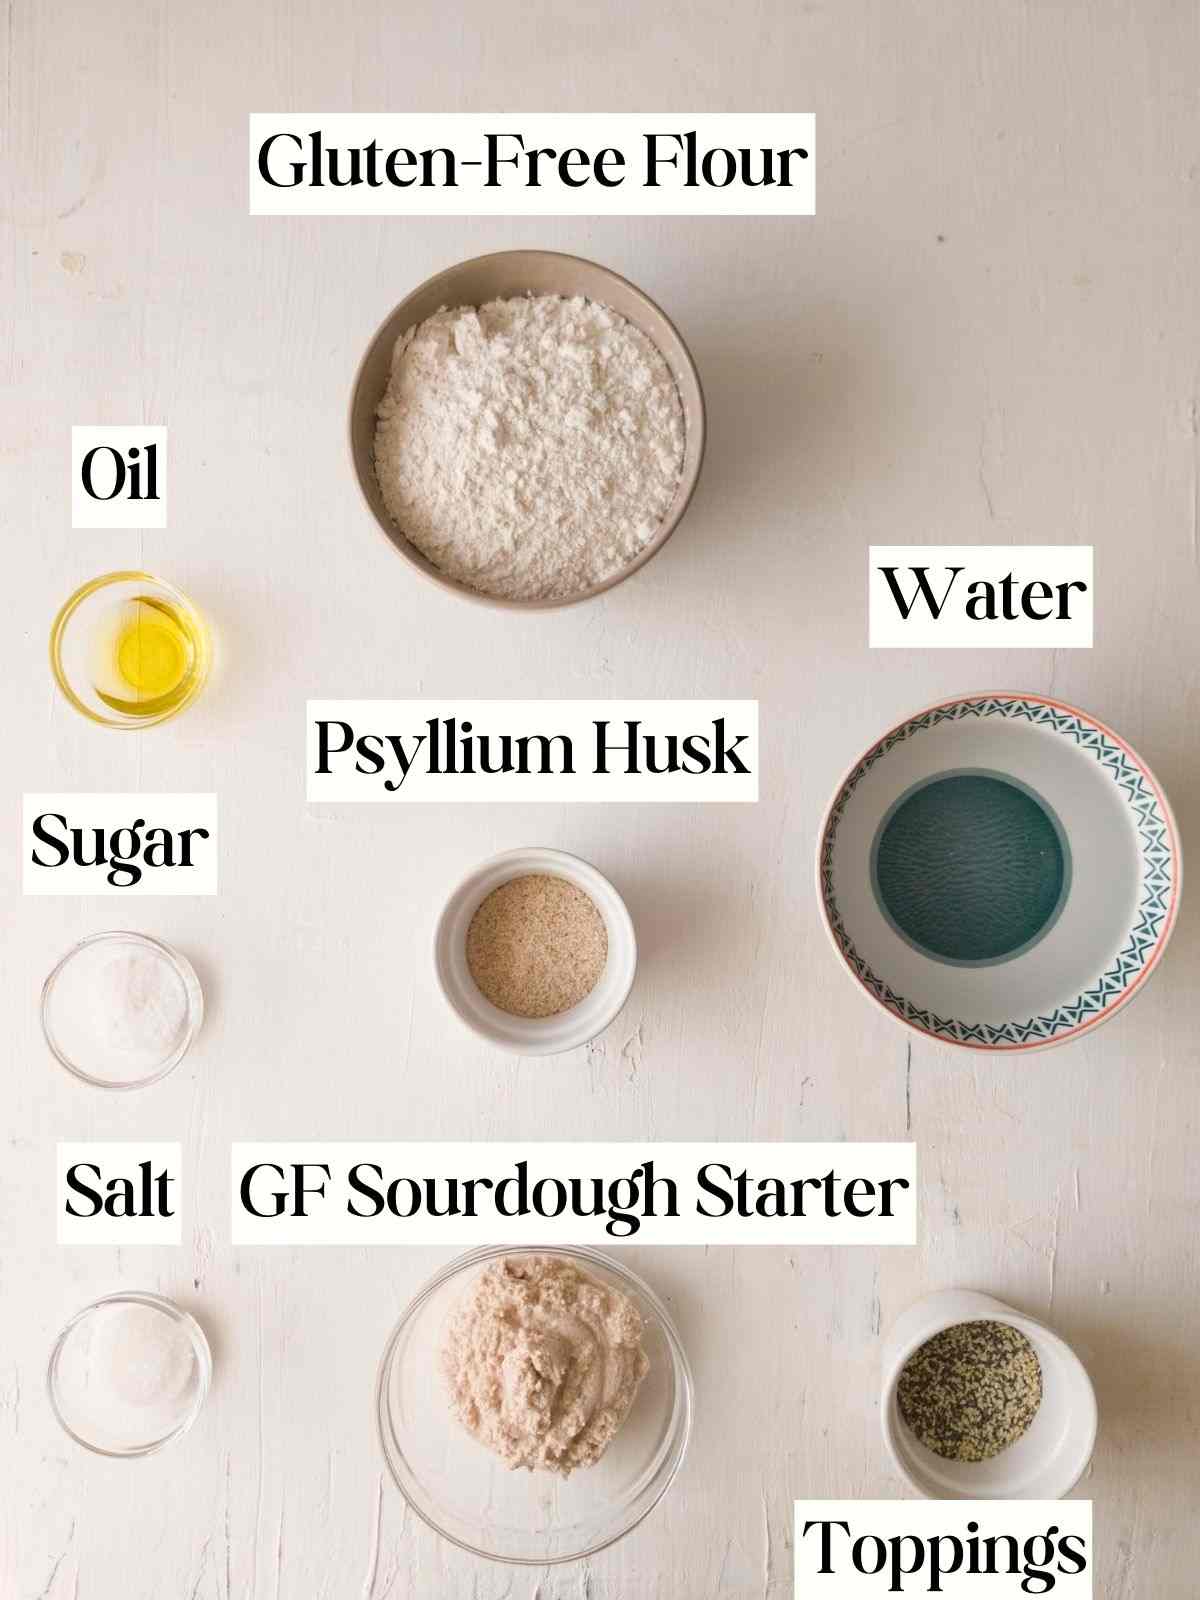 Ingredients on a white surface.